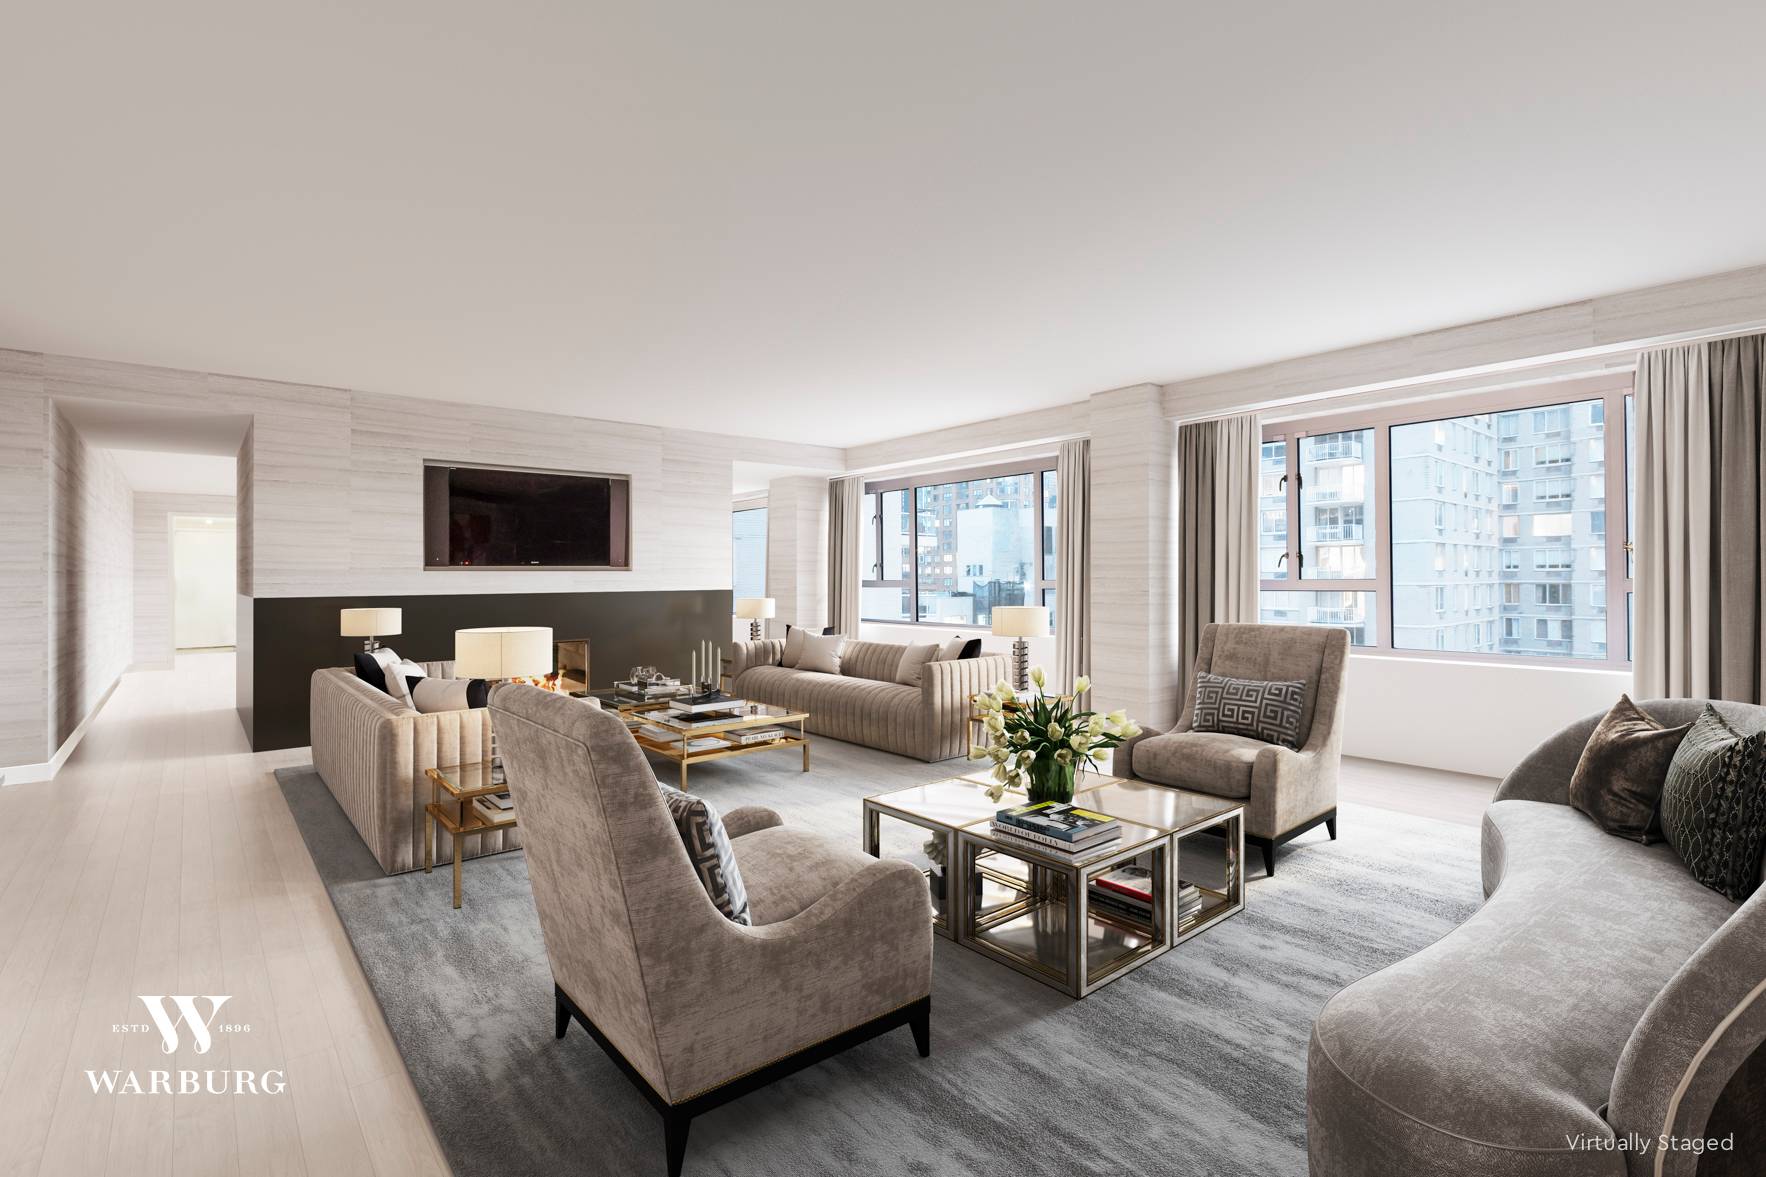 Located on the 16th floor of the coveted central C tower of the Manhattan House Condominium, this renovated 4 bedroom, 5 bathroom residence has it all.